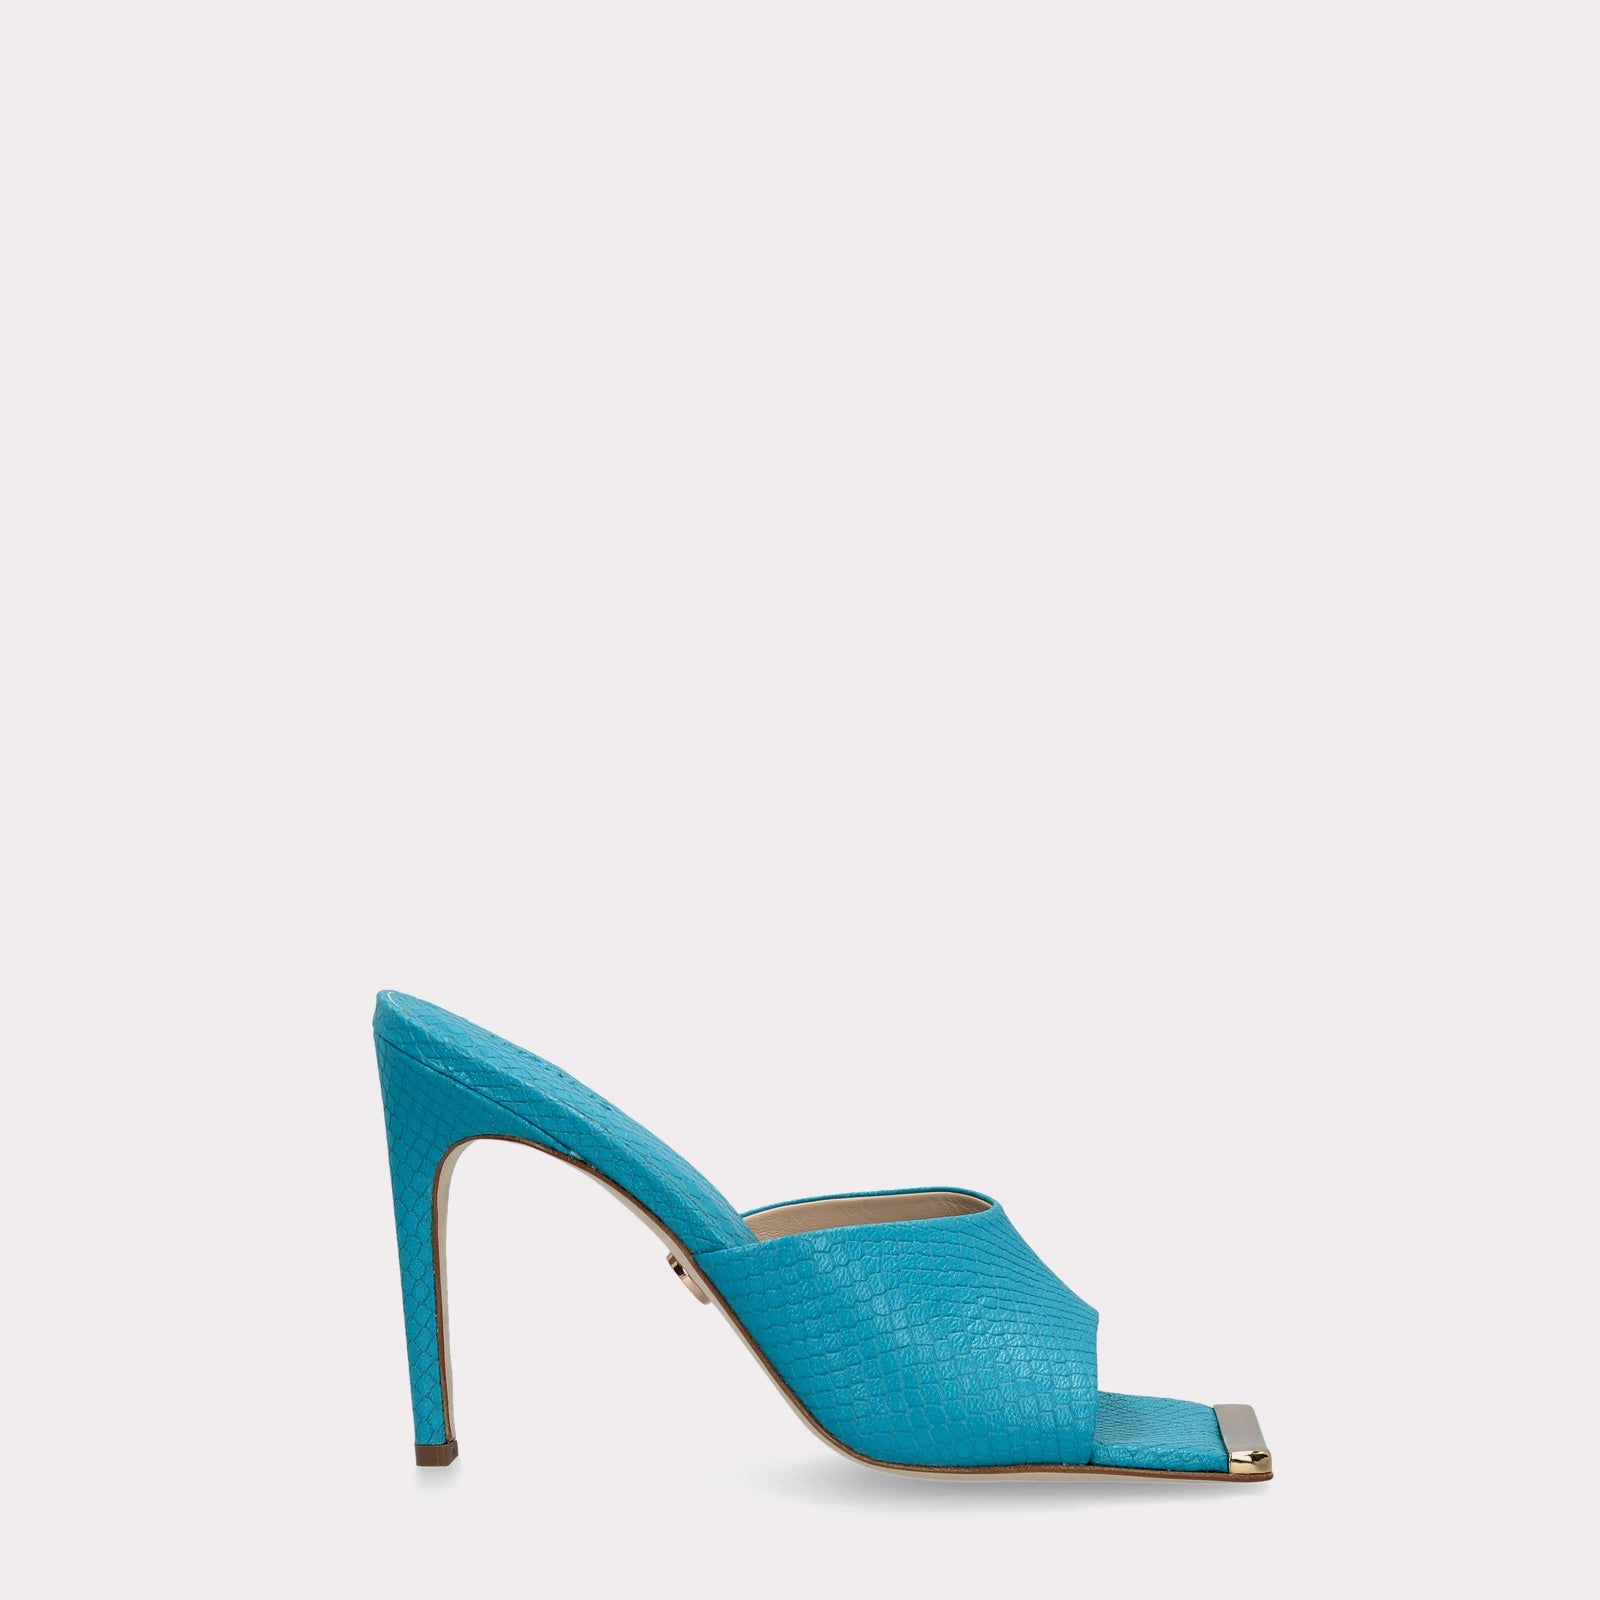 TEXTURED LEATHER MULES KALINA BLUE